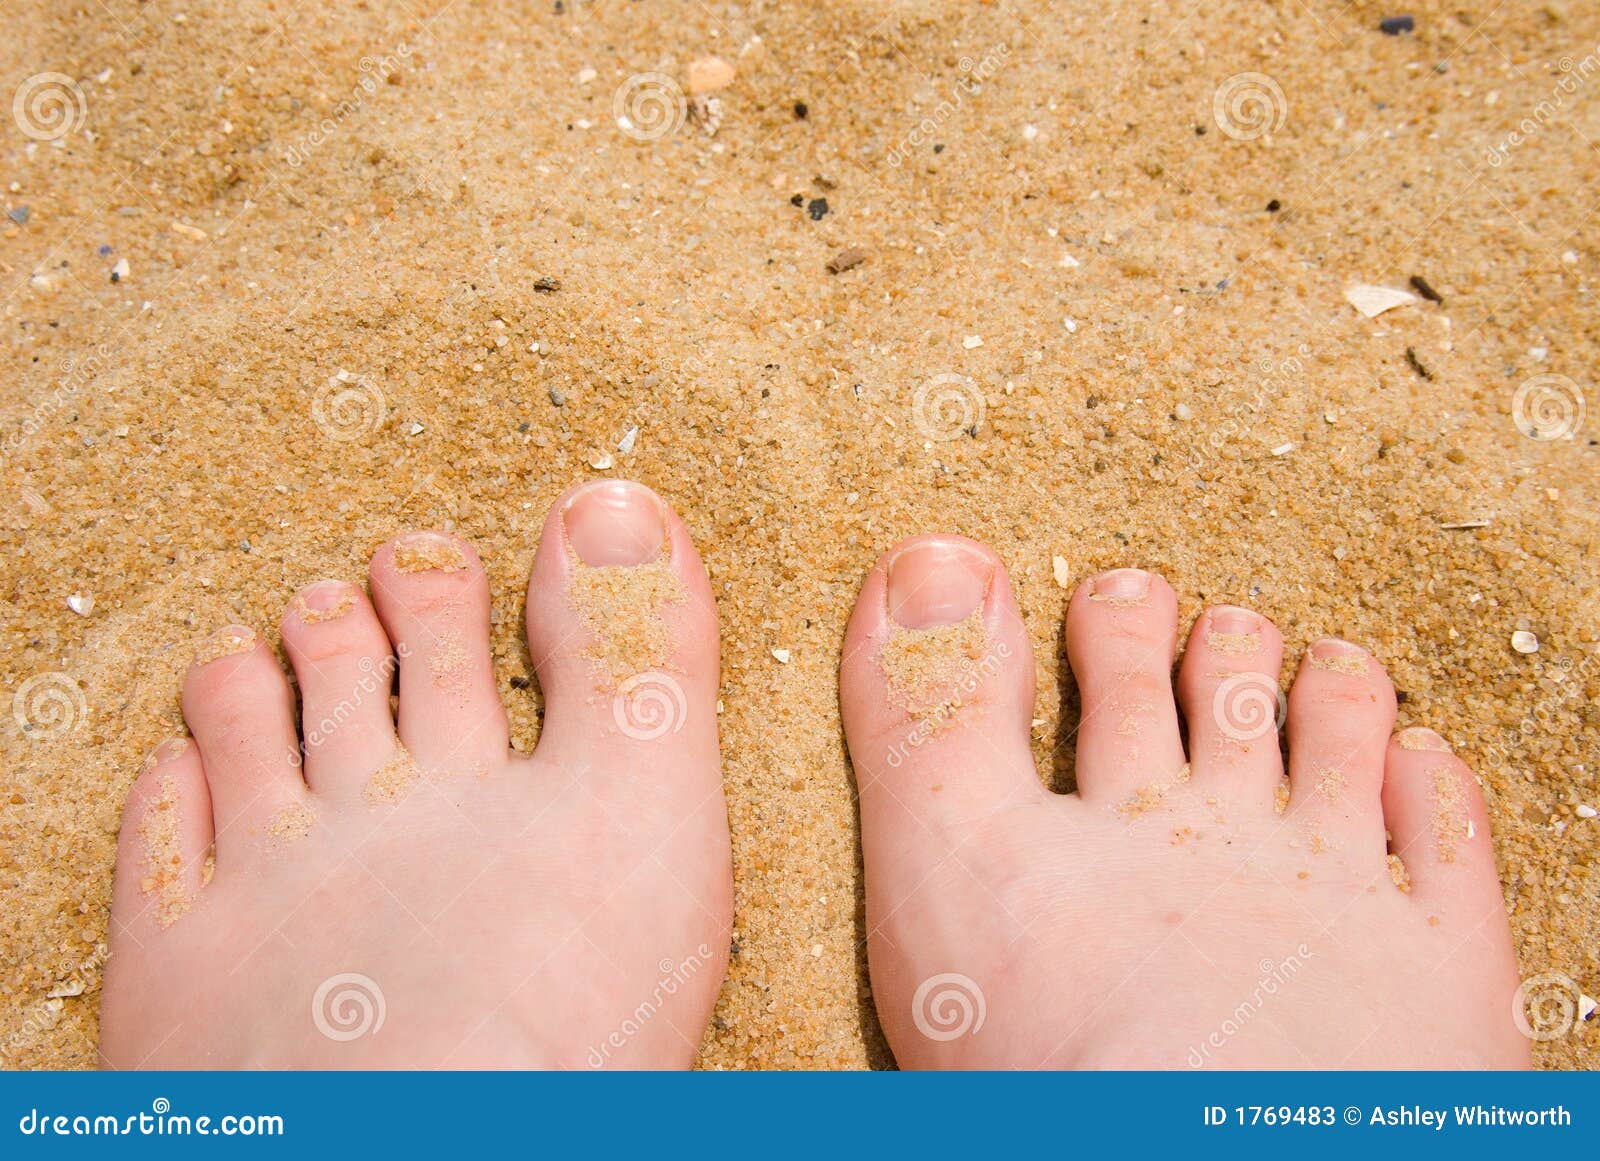 Sand Between My Toes Stock Photos Image